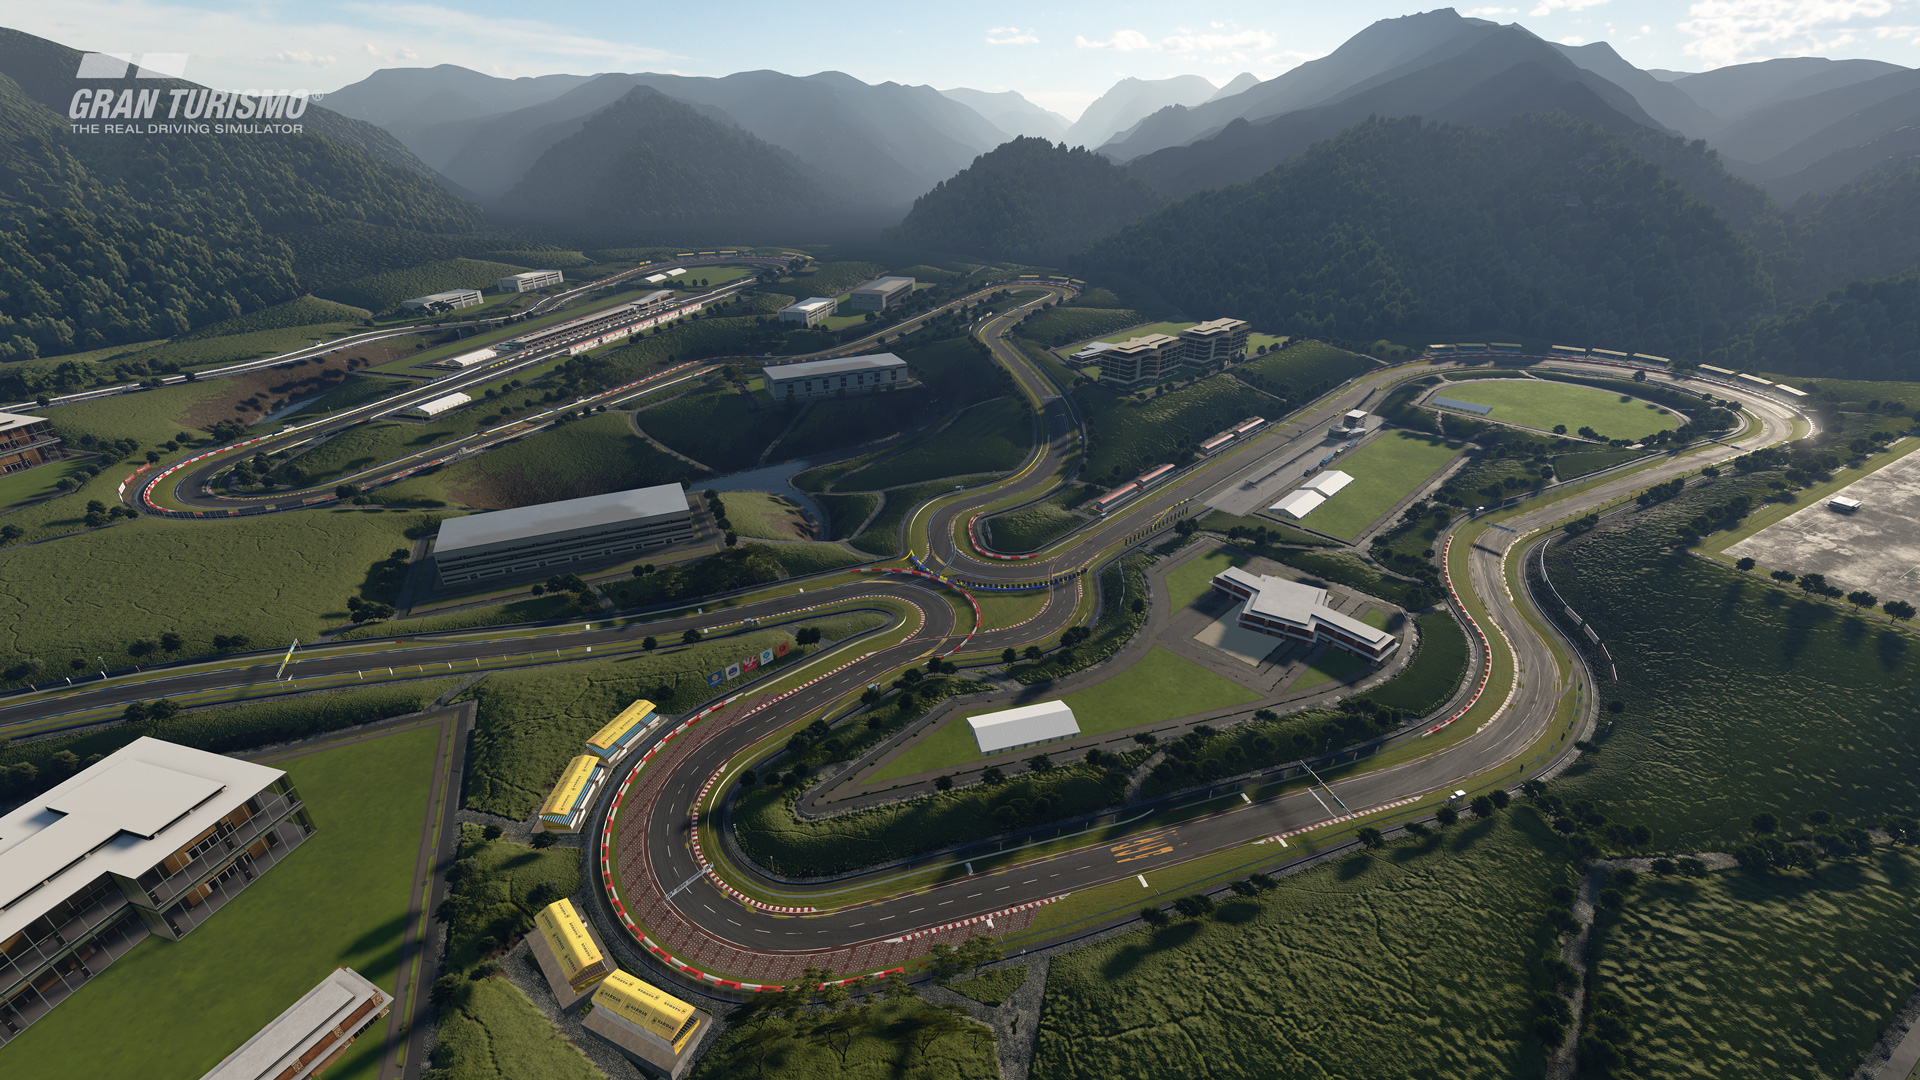 Gran Turismo 7 Update 1.30 Available - Patch Notes - Operation Sports